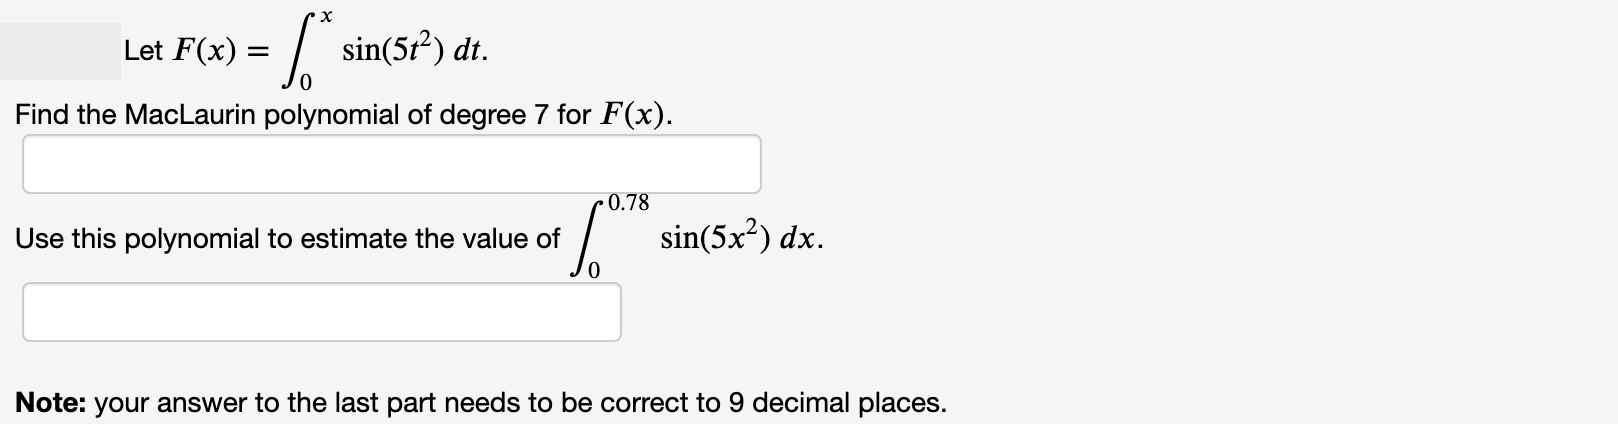 Let F(x) = | sin(5t²) dt.
Find the MacLaurin polynomial of degree 7 for F(x).
0.78
Use this polynomial to estimate the value of
| sin(5x?) dx.
Note: your answer to the last part needs to be correct to 9 decimal places.
